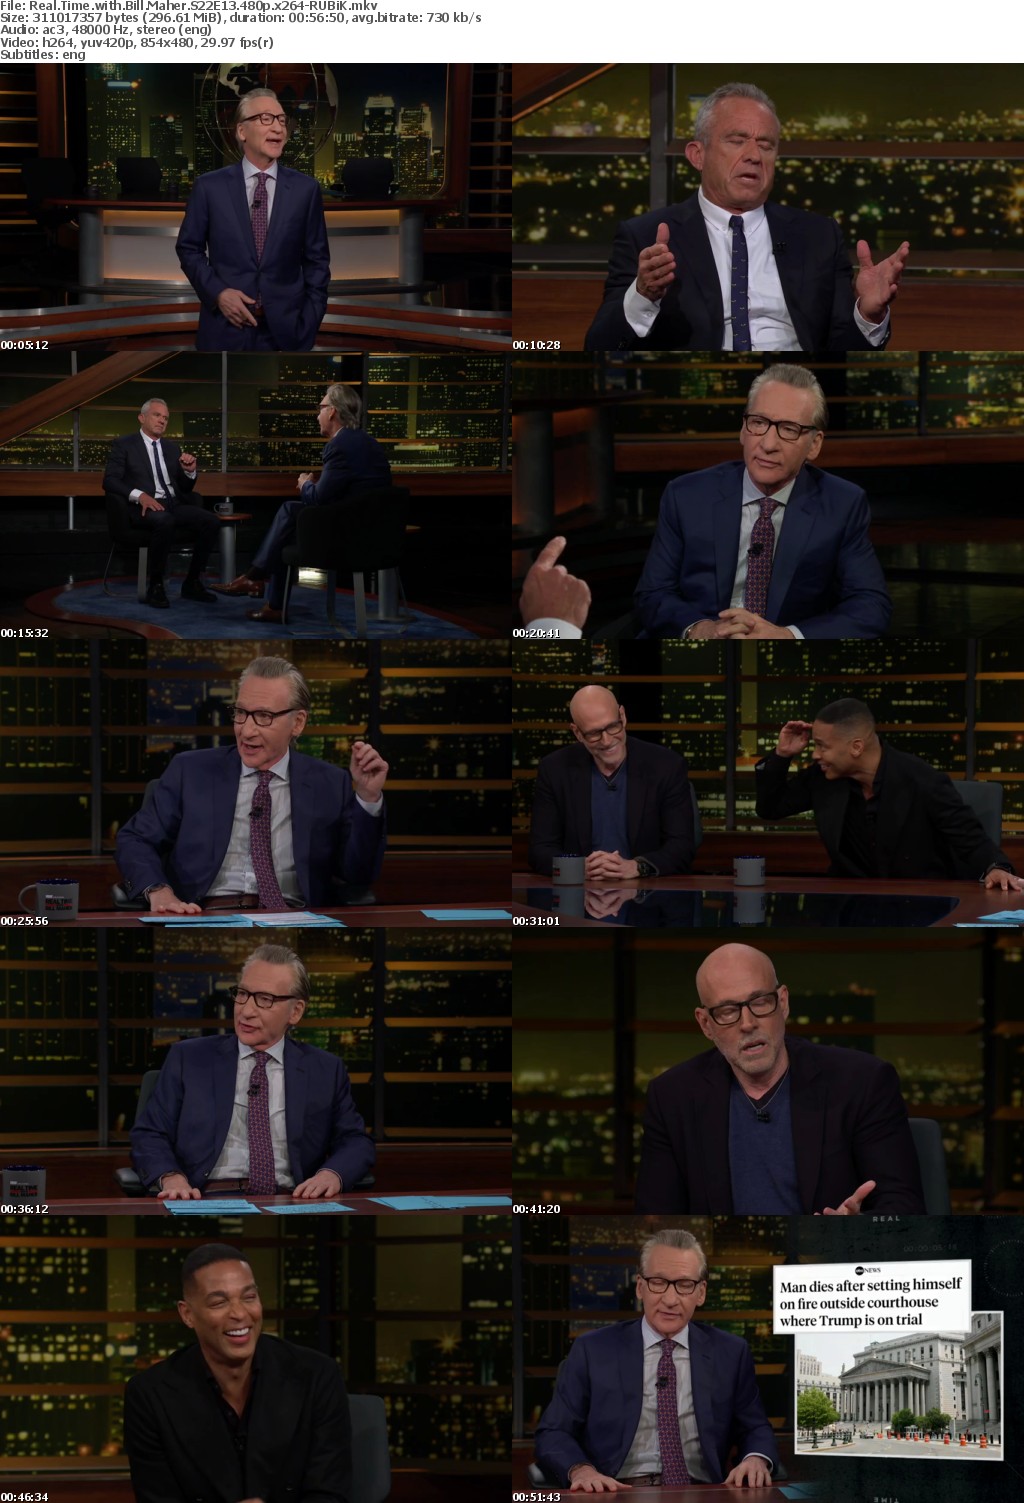 Real Time with Bill Maher S22E13 480p x264-RUBiK Saturn5